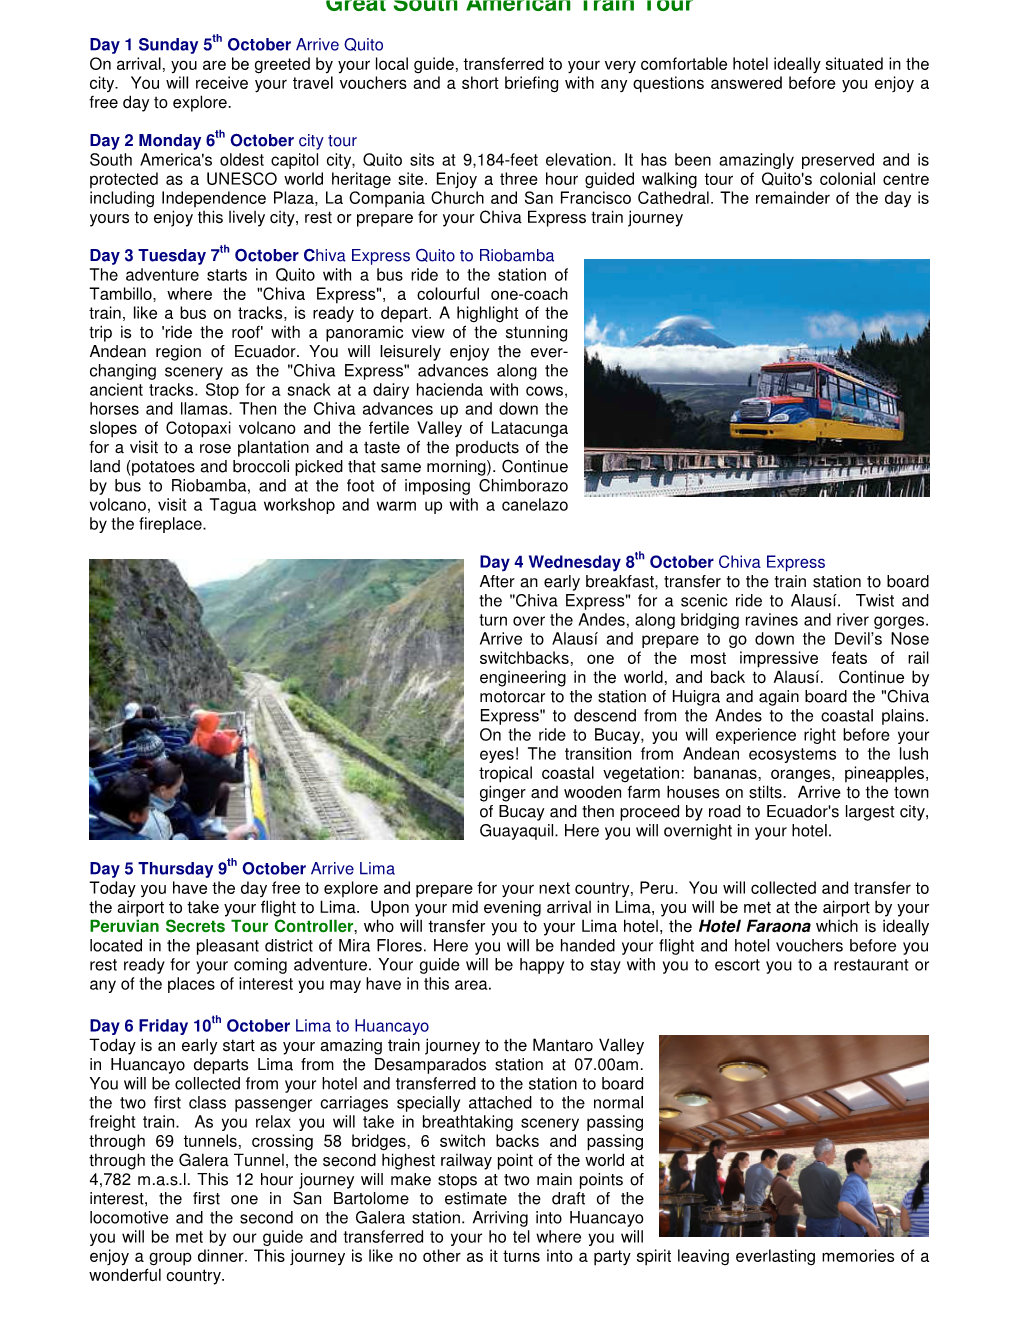 Great South American Train Tour